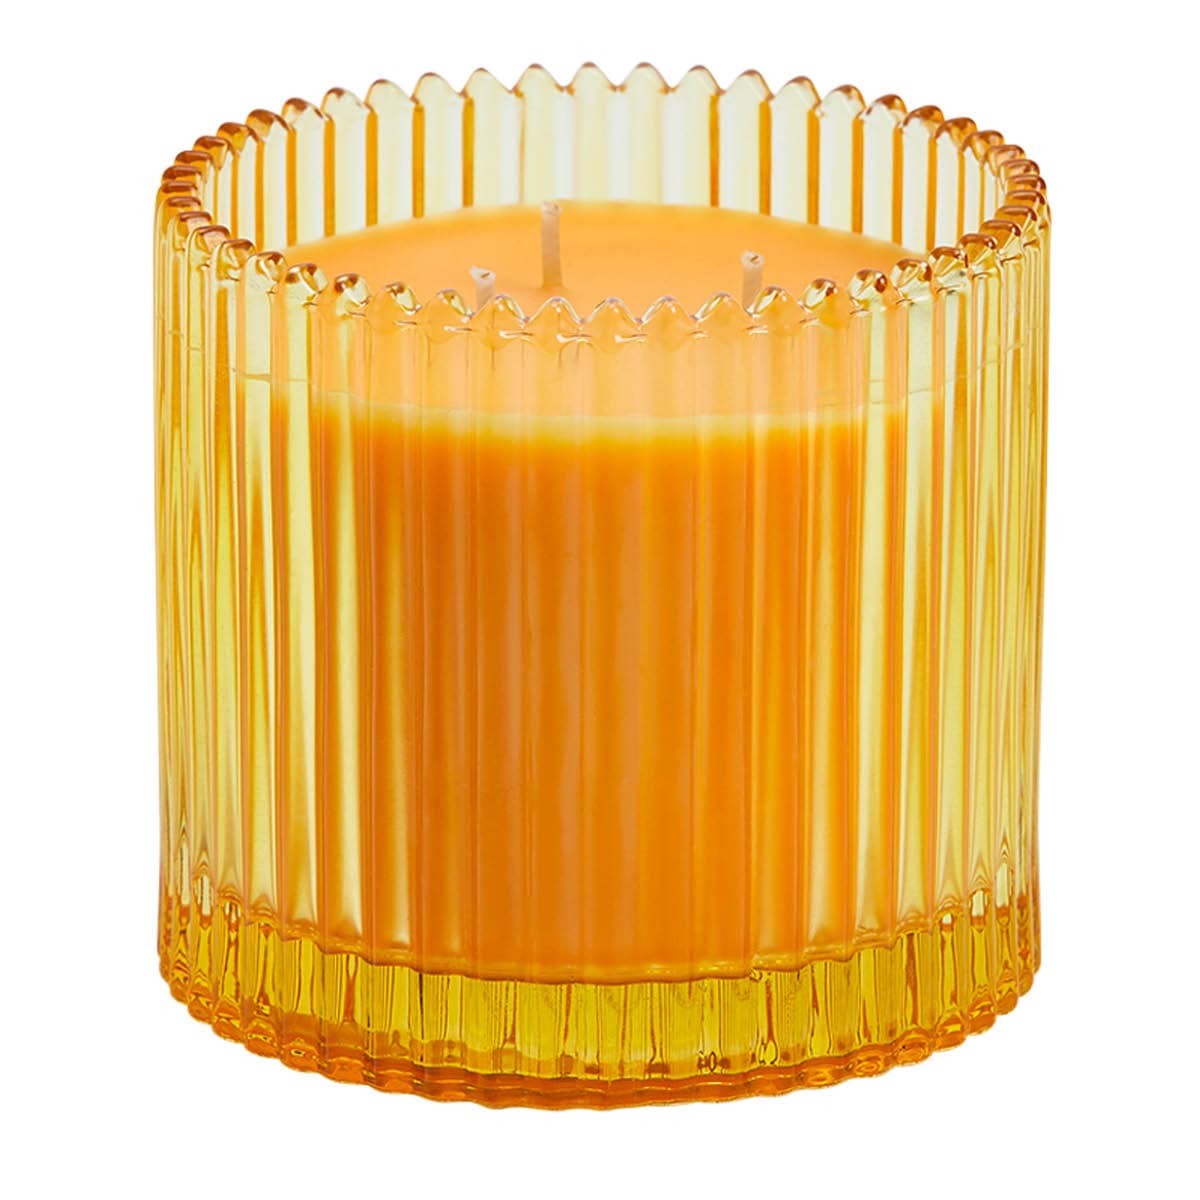 Apricot Peach Preserve Specialty Jar Candle - PartyLite US